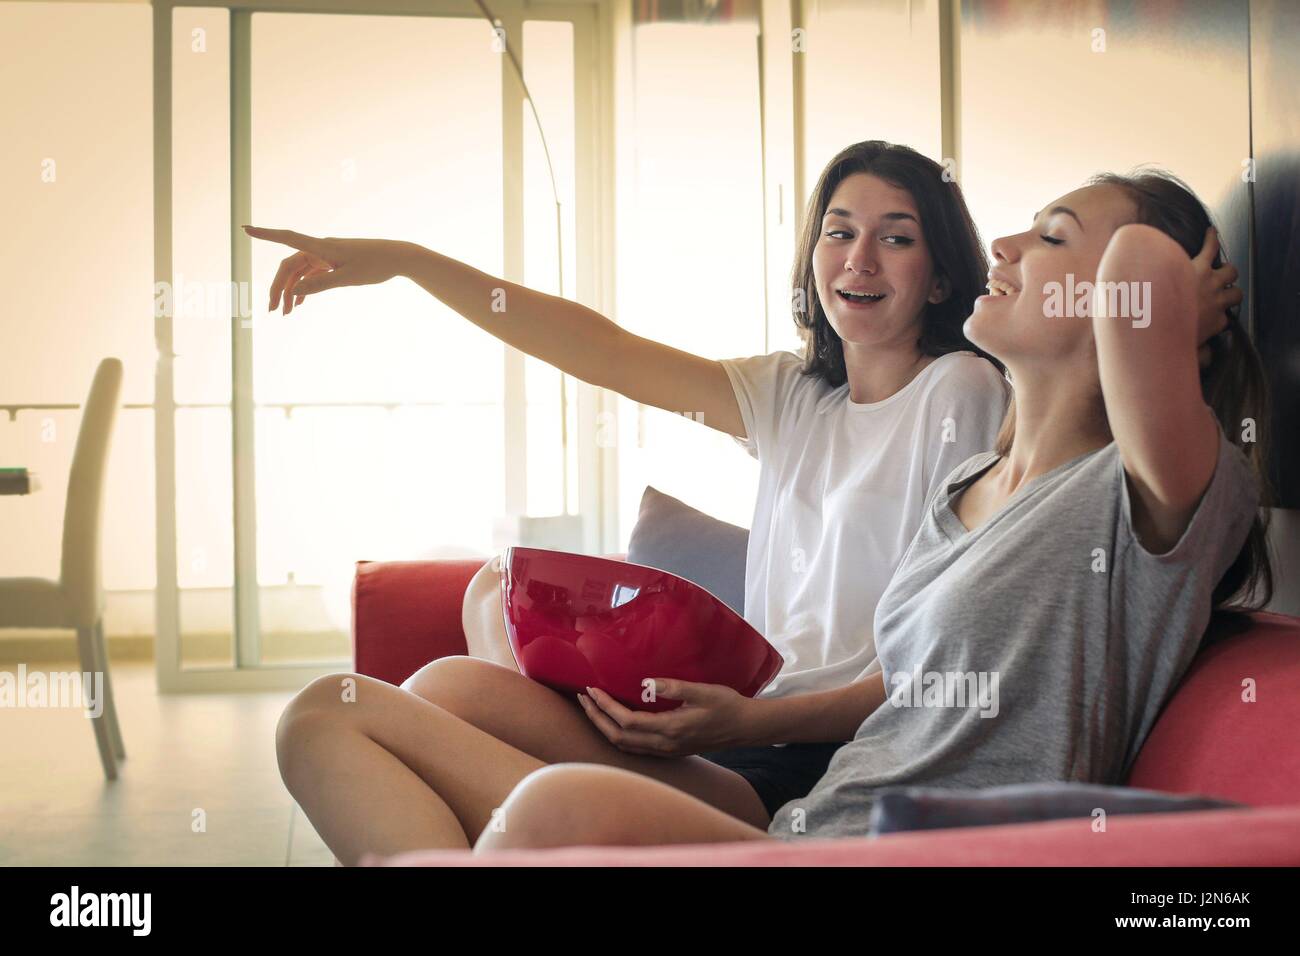 2 women friends watching TV together Stock Photo